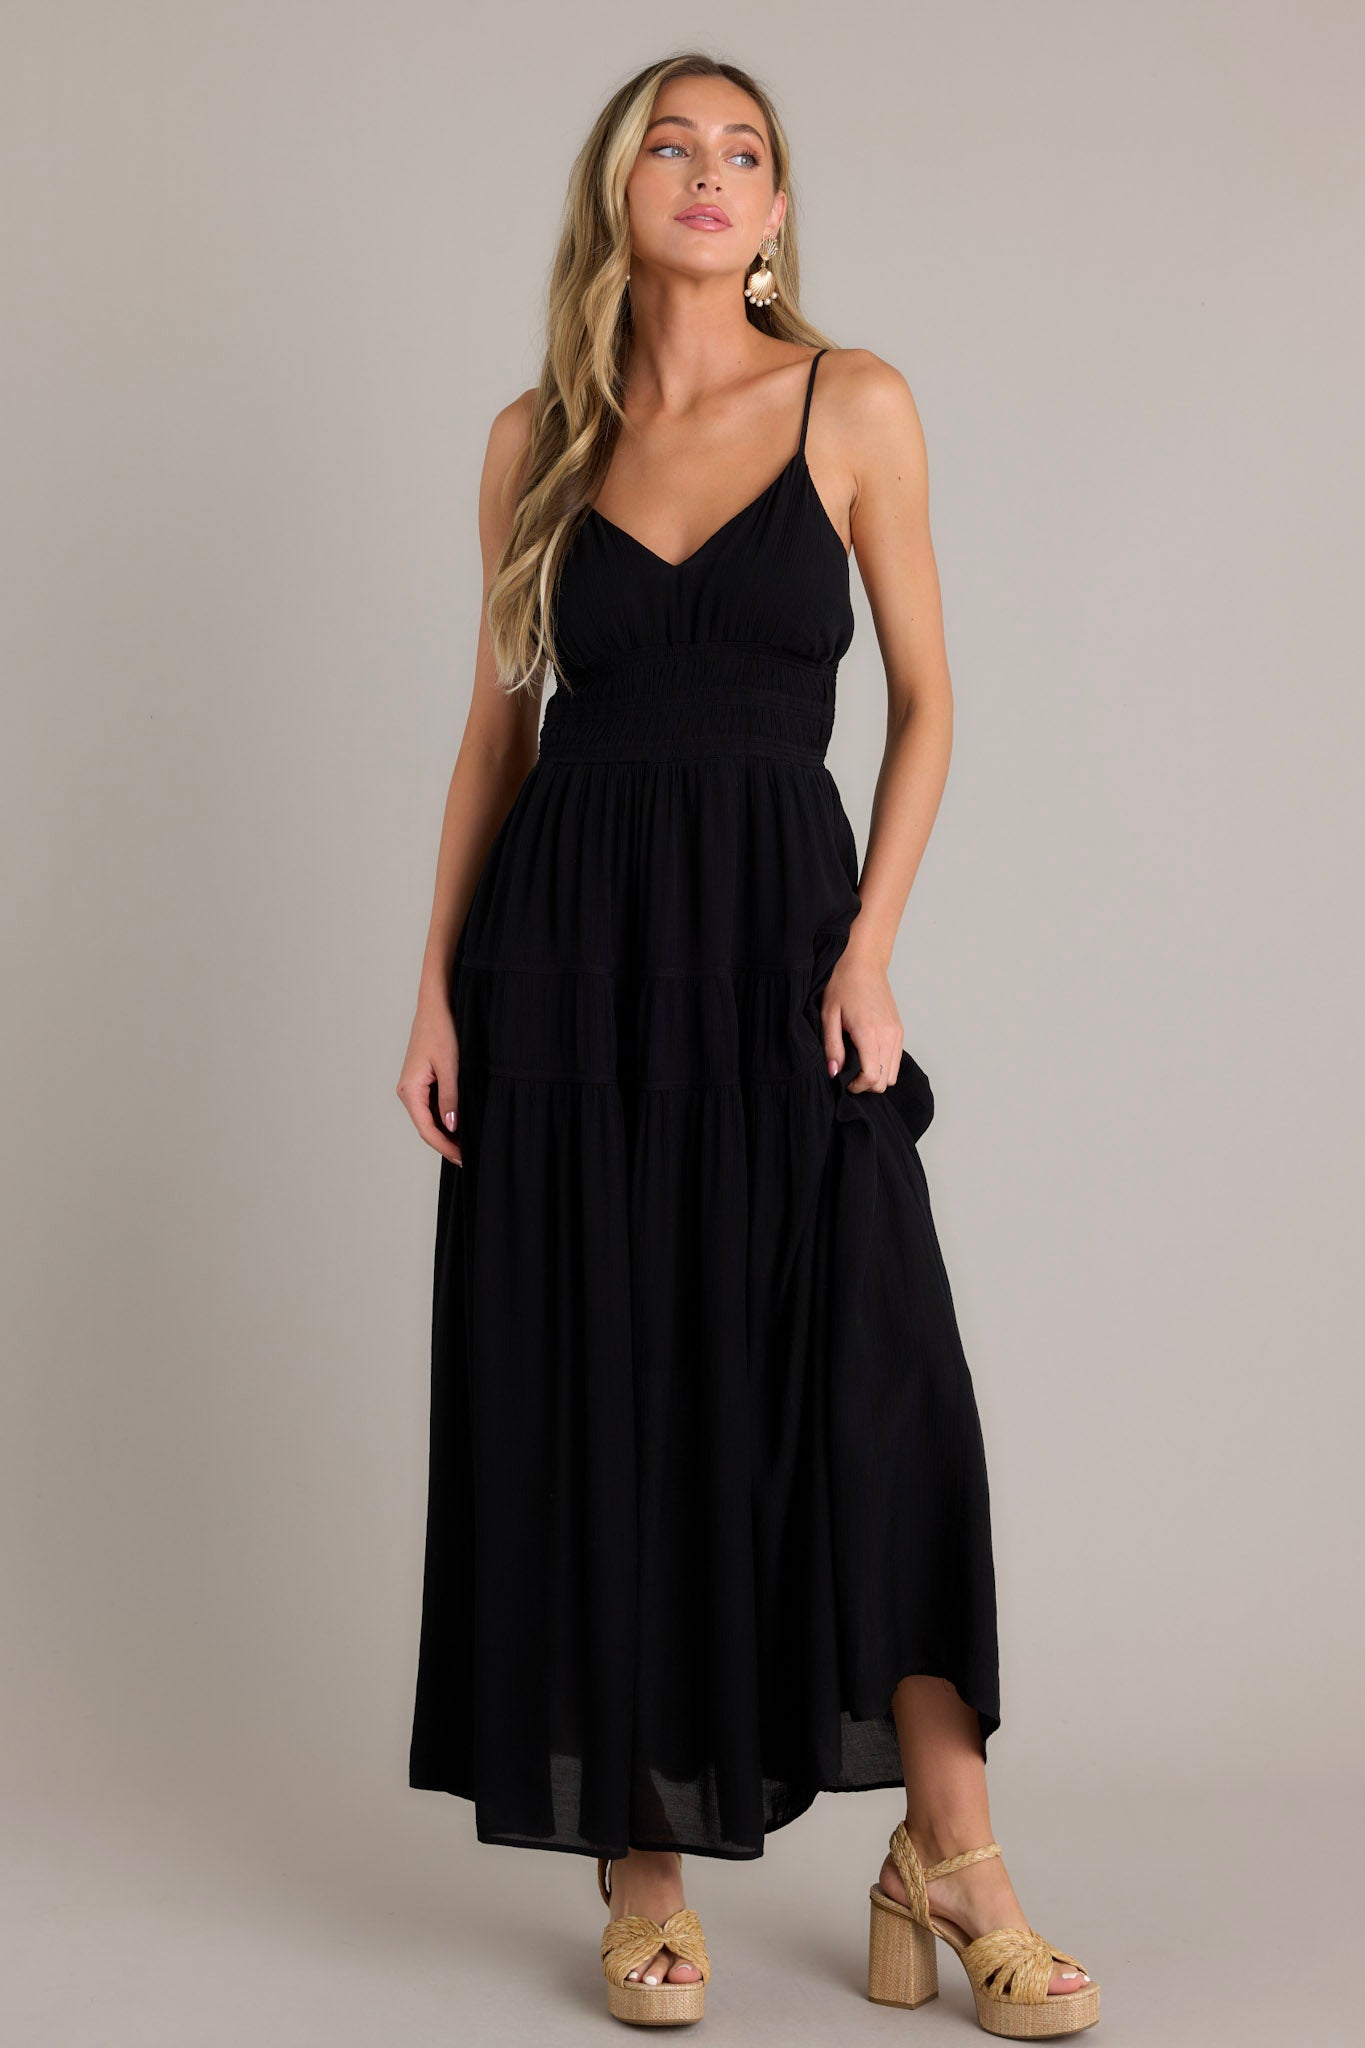 This black maxi dress features a v-neckline, thin adjustable straps, an open back, a fully smocked waist and lower back, tiers, and a flowing silhouette.